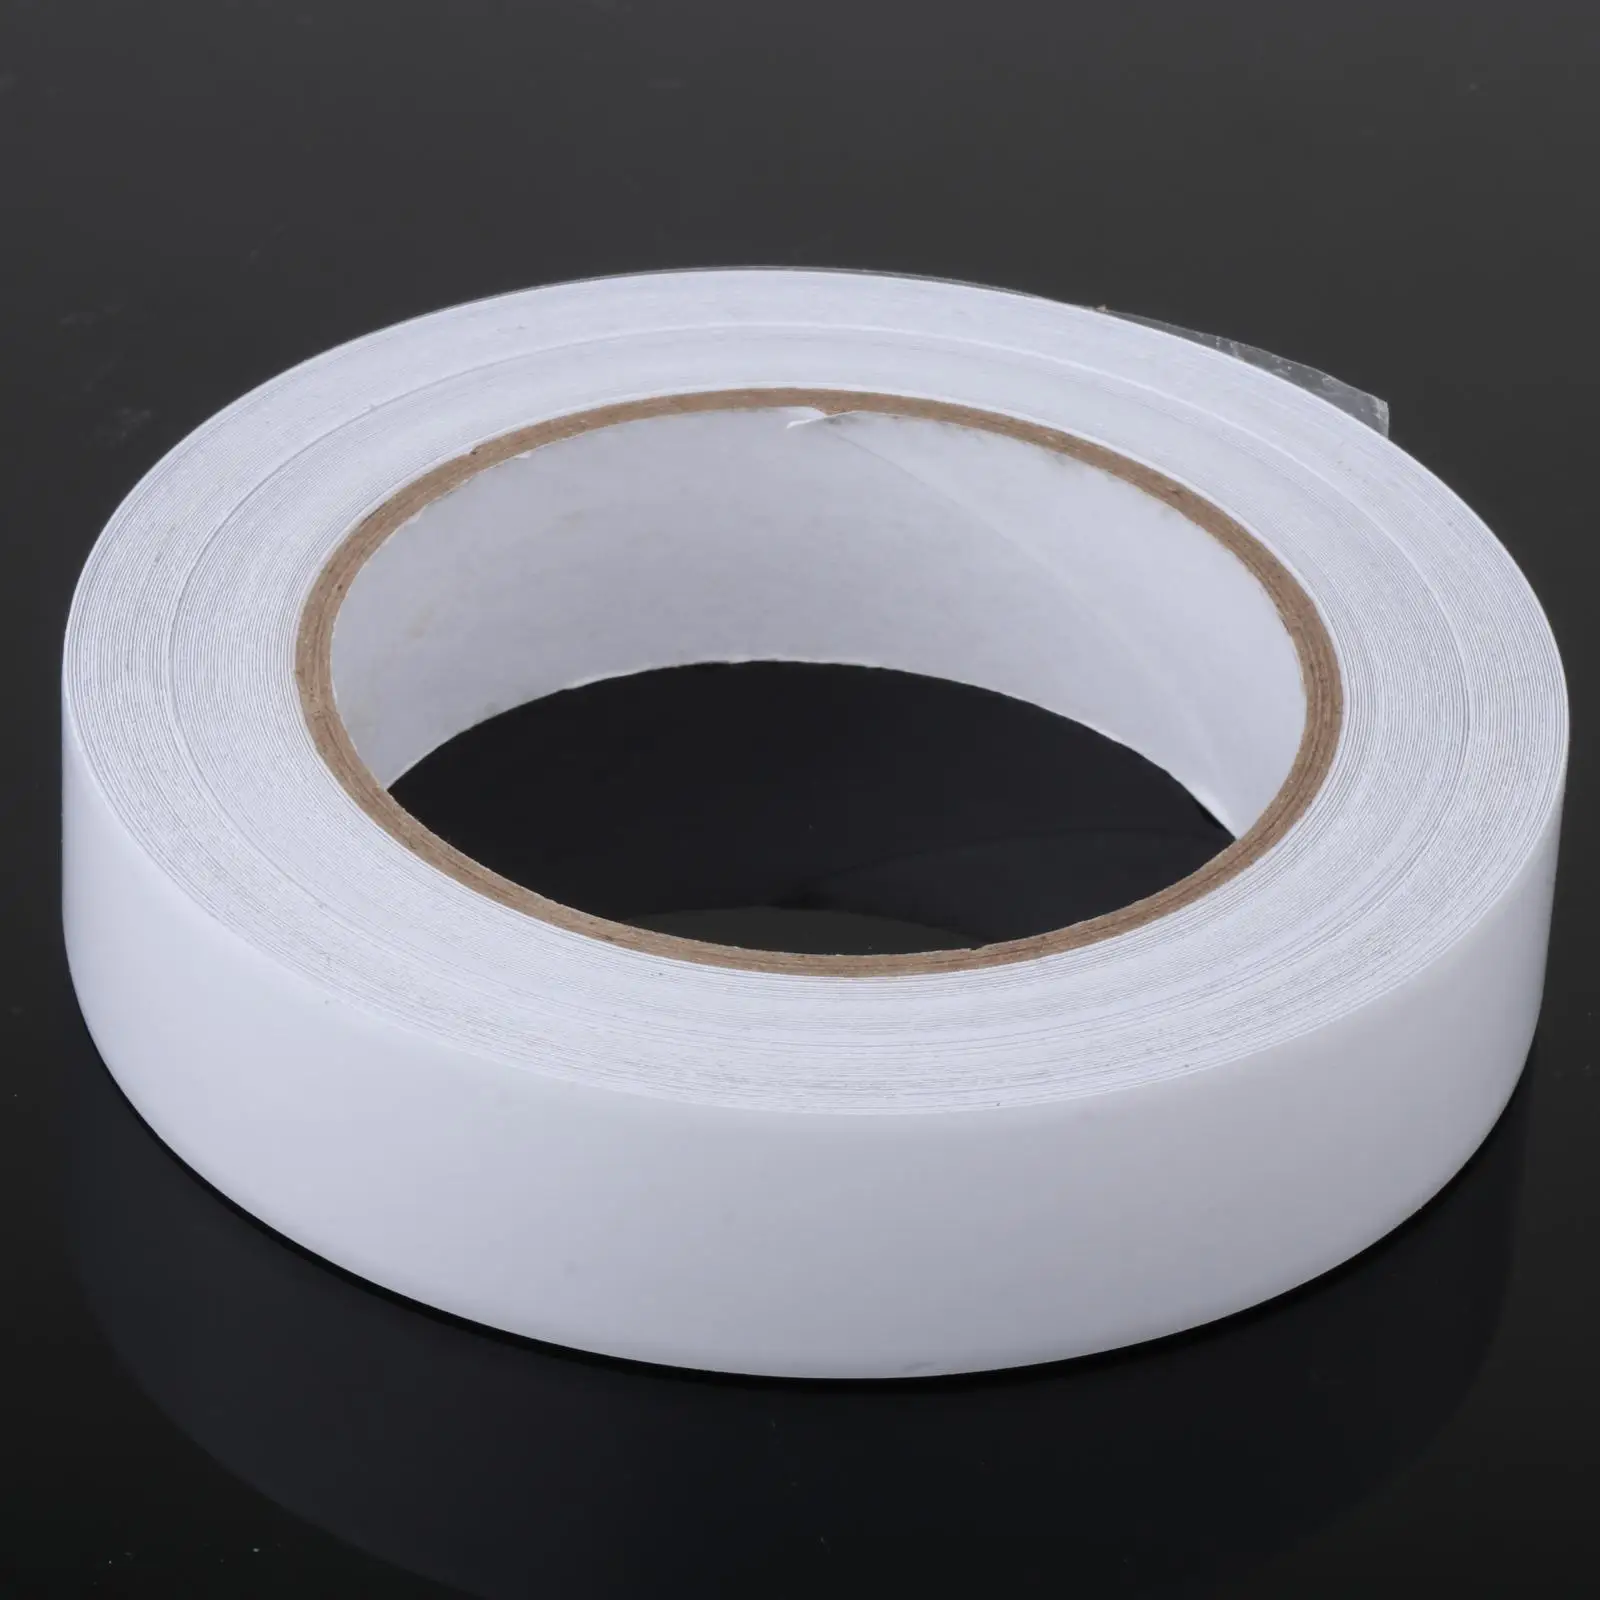 Swimming Rings Repair Tape Camping Tent Cover Patch Waterproof Durable Awning Pool Patch for Inflatable Boat Trampoline Outdoor